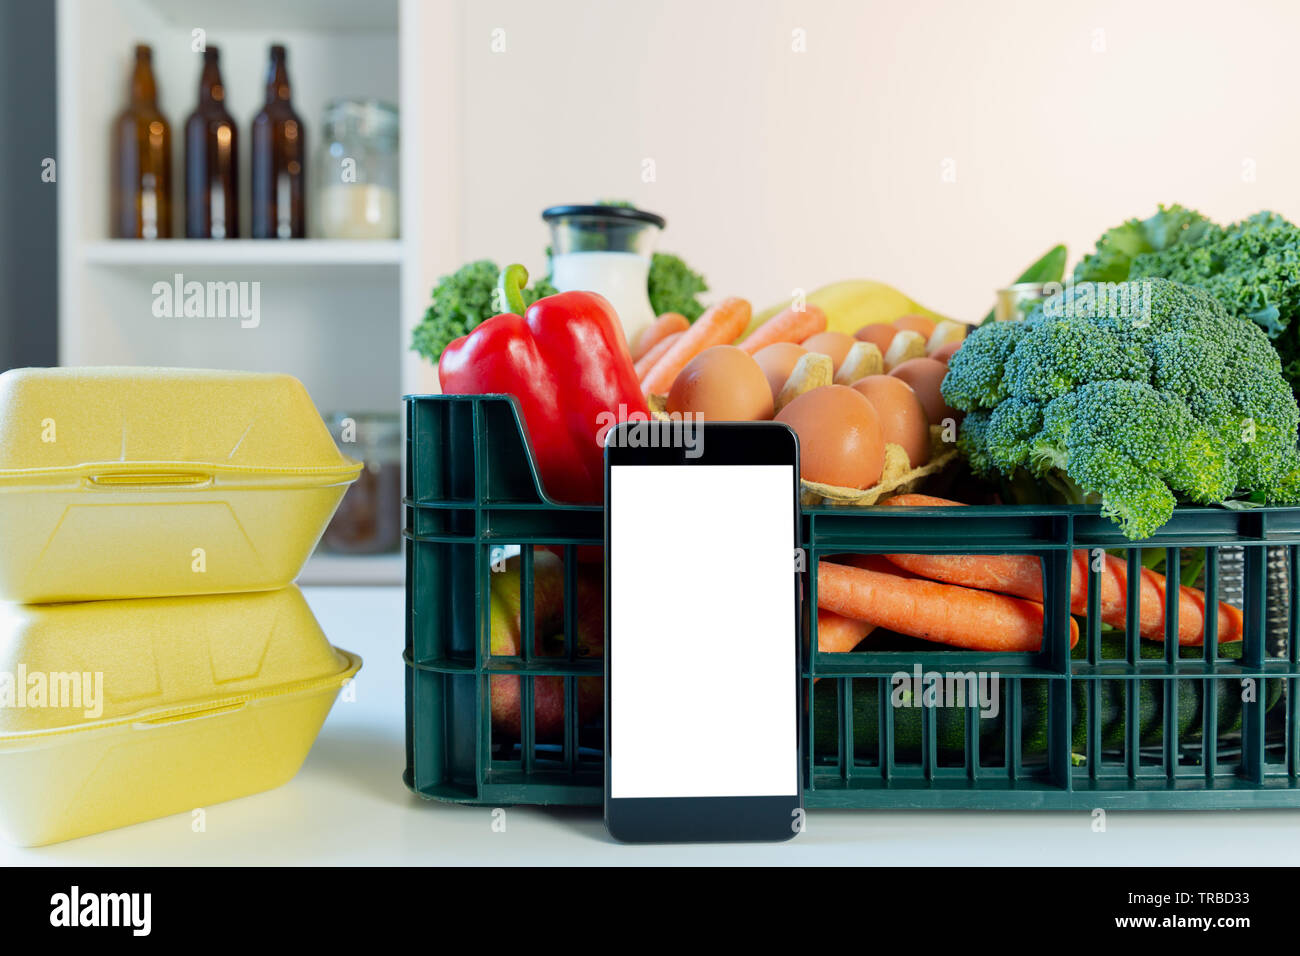 Food delivery service - smartphone in front of the box of groceries Stock Photo